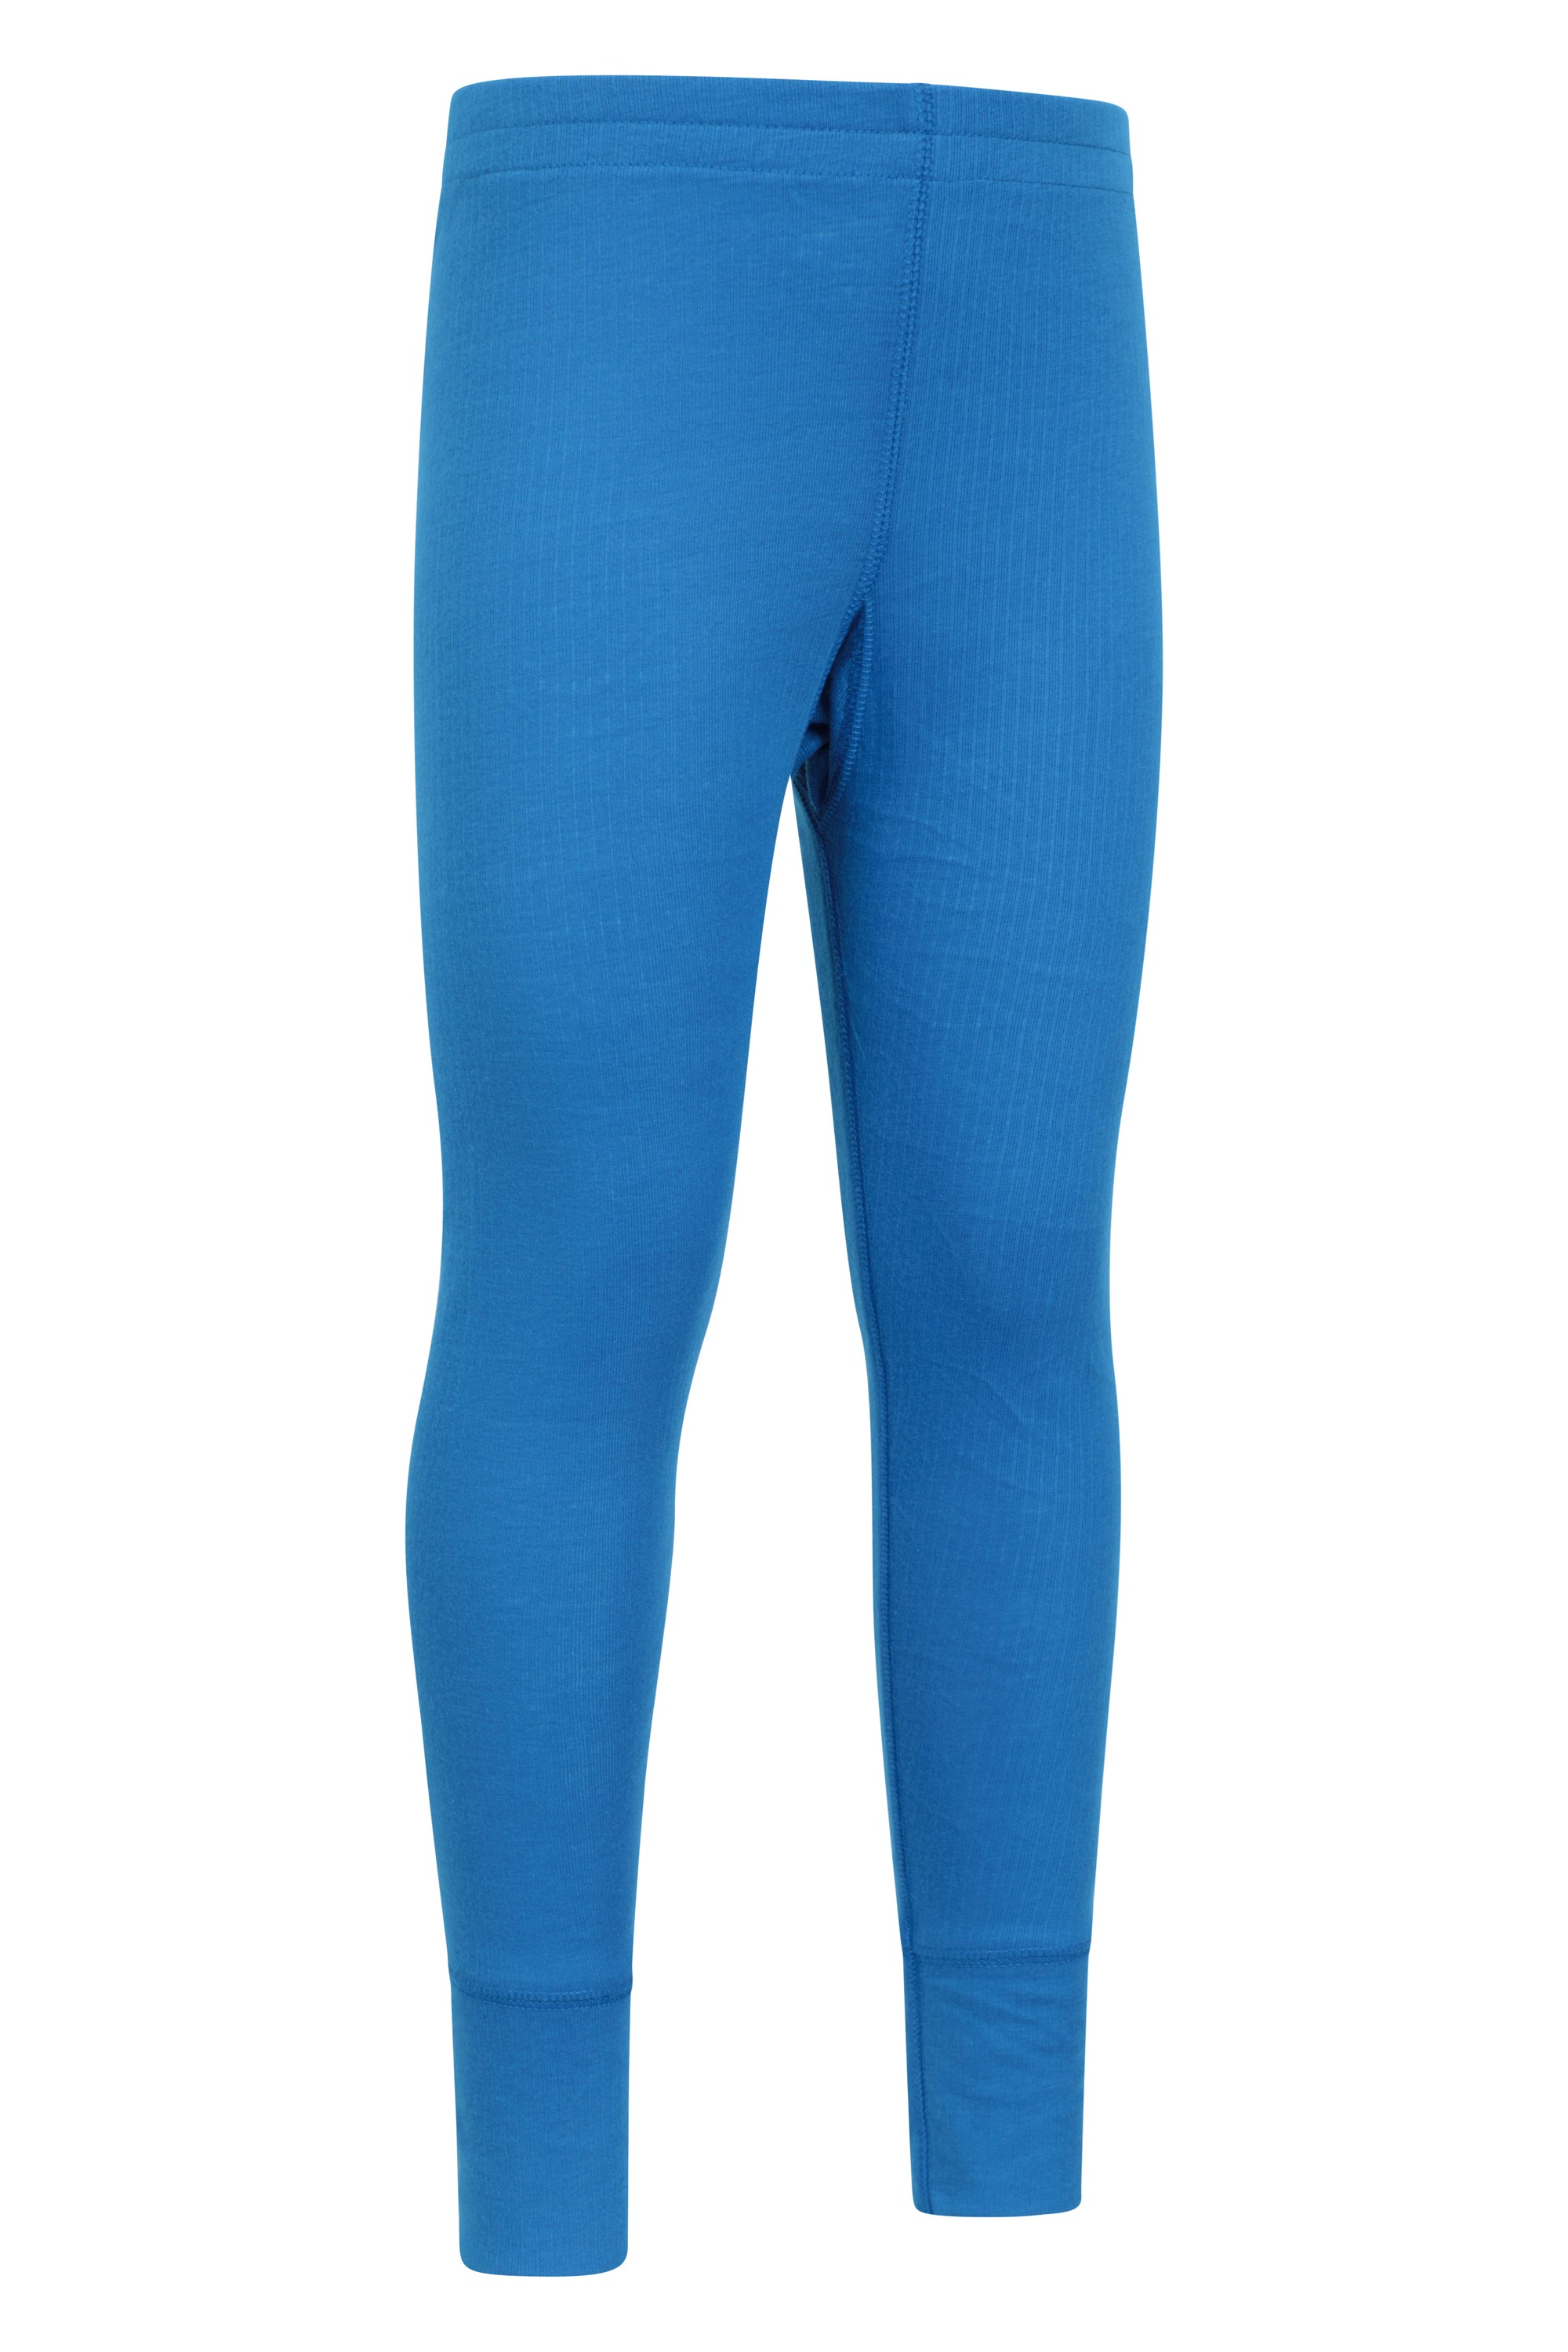  Youth Long Johns For Kids Thermals Top And Bottom Set  Stretch Boys Long Underwear Suit Ultra Soft Fleece Pants Warm Ski XL Blue